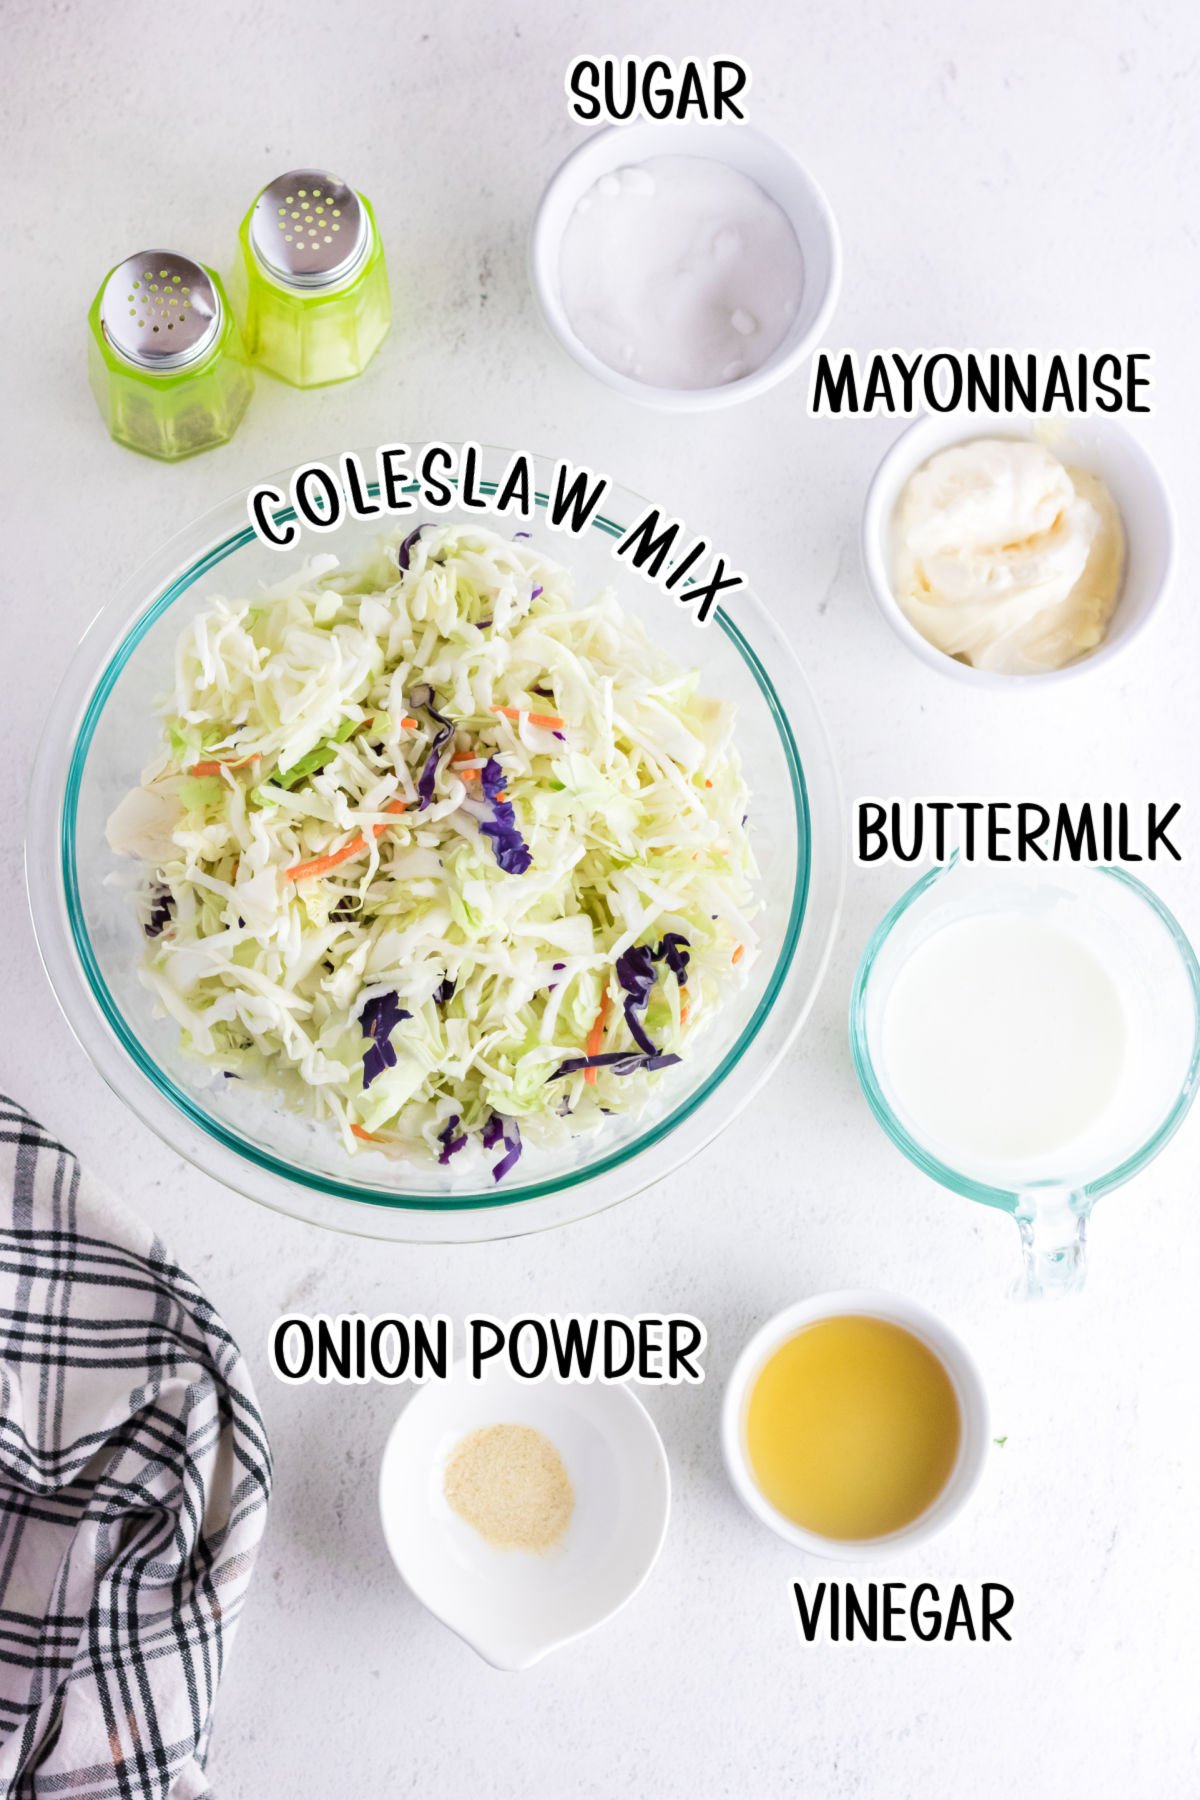 Labeled ingredients for coleslaw.